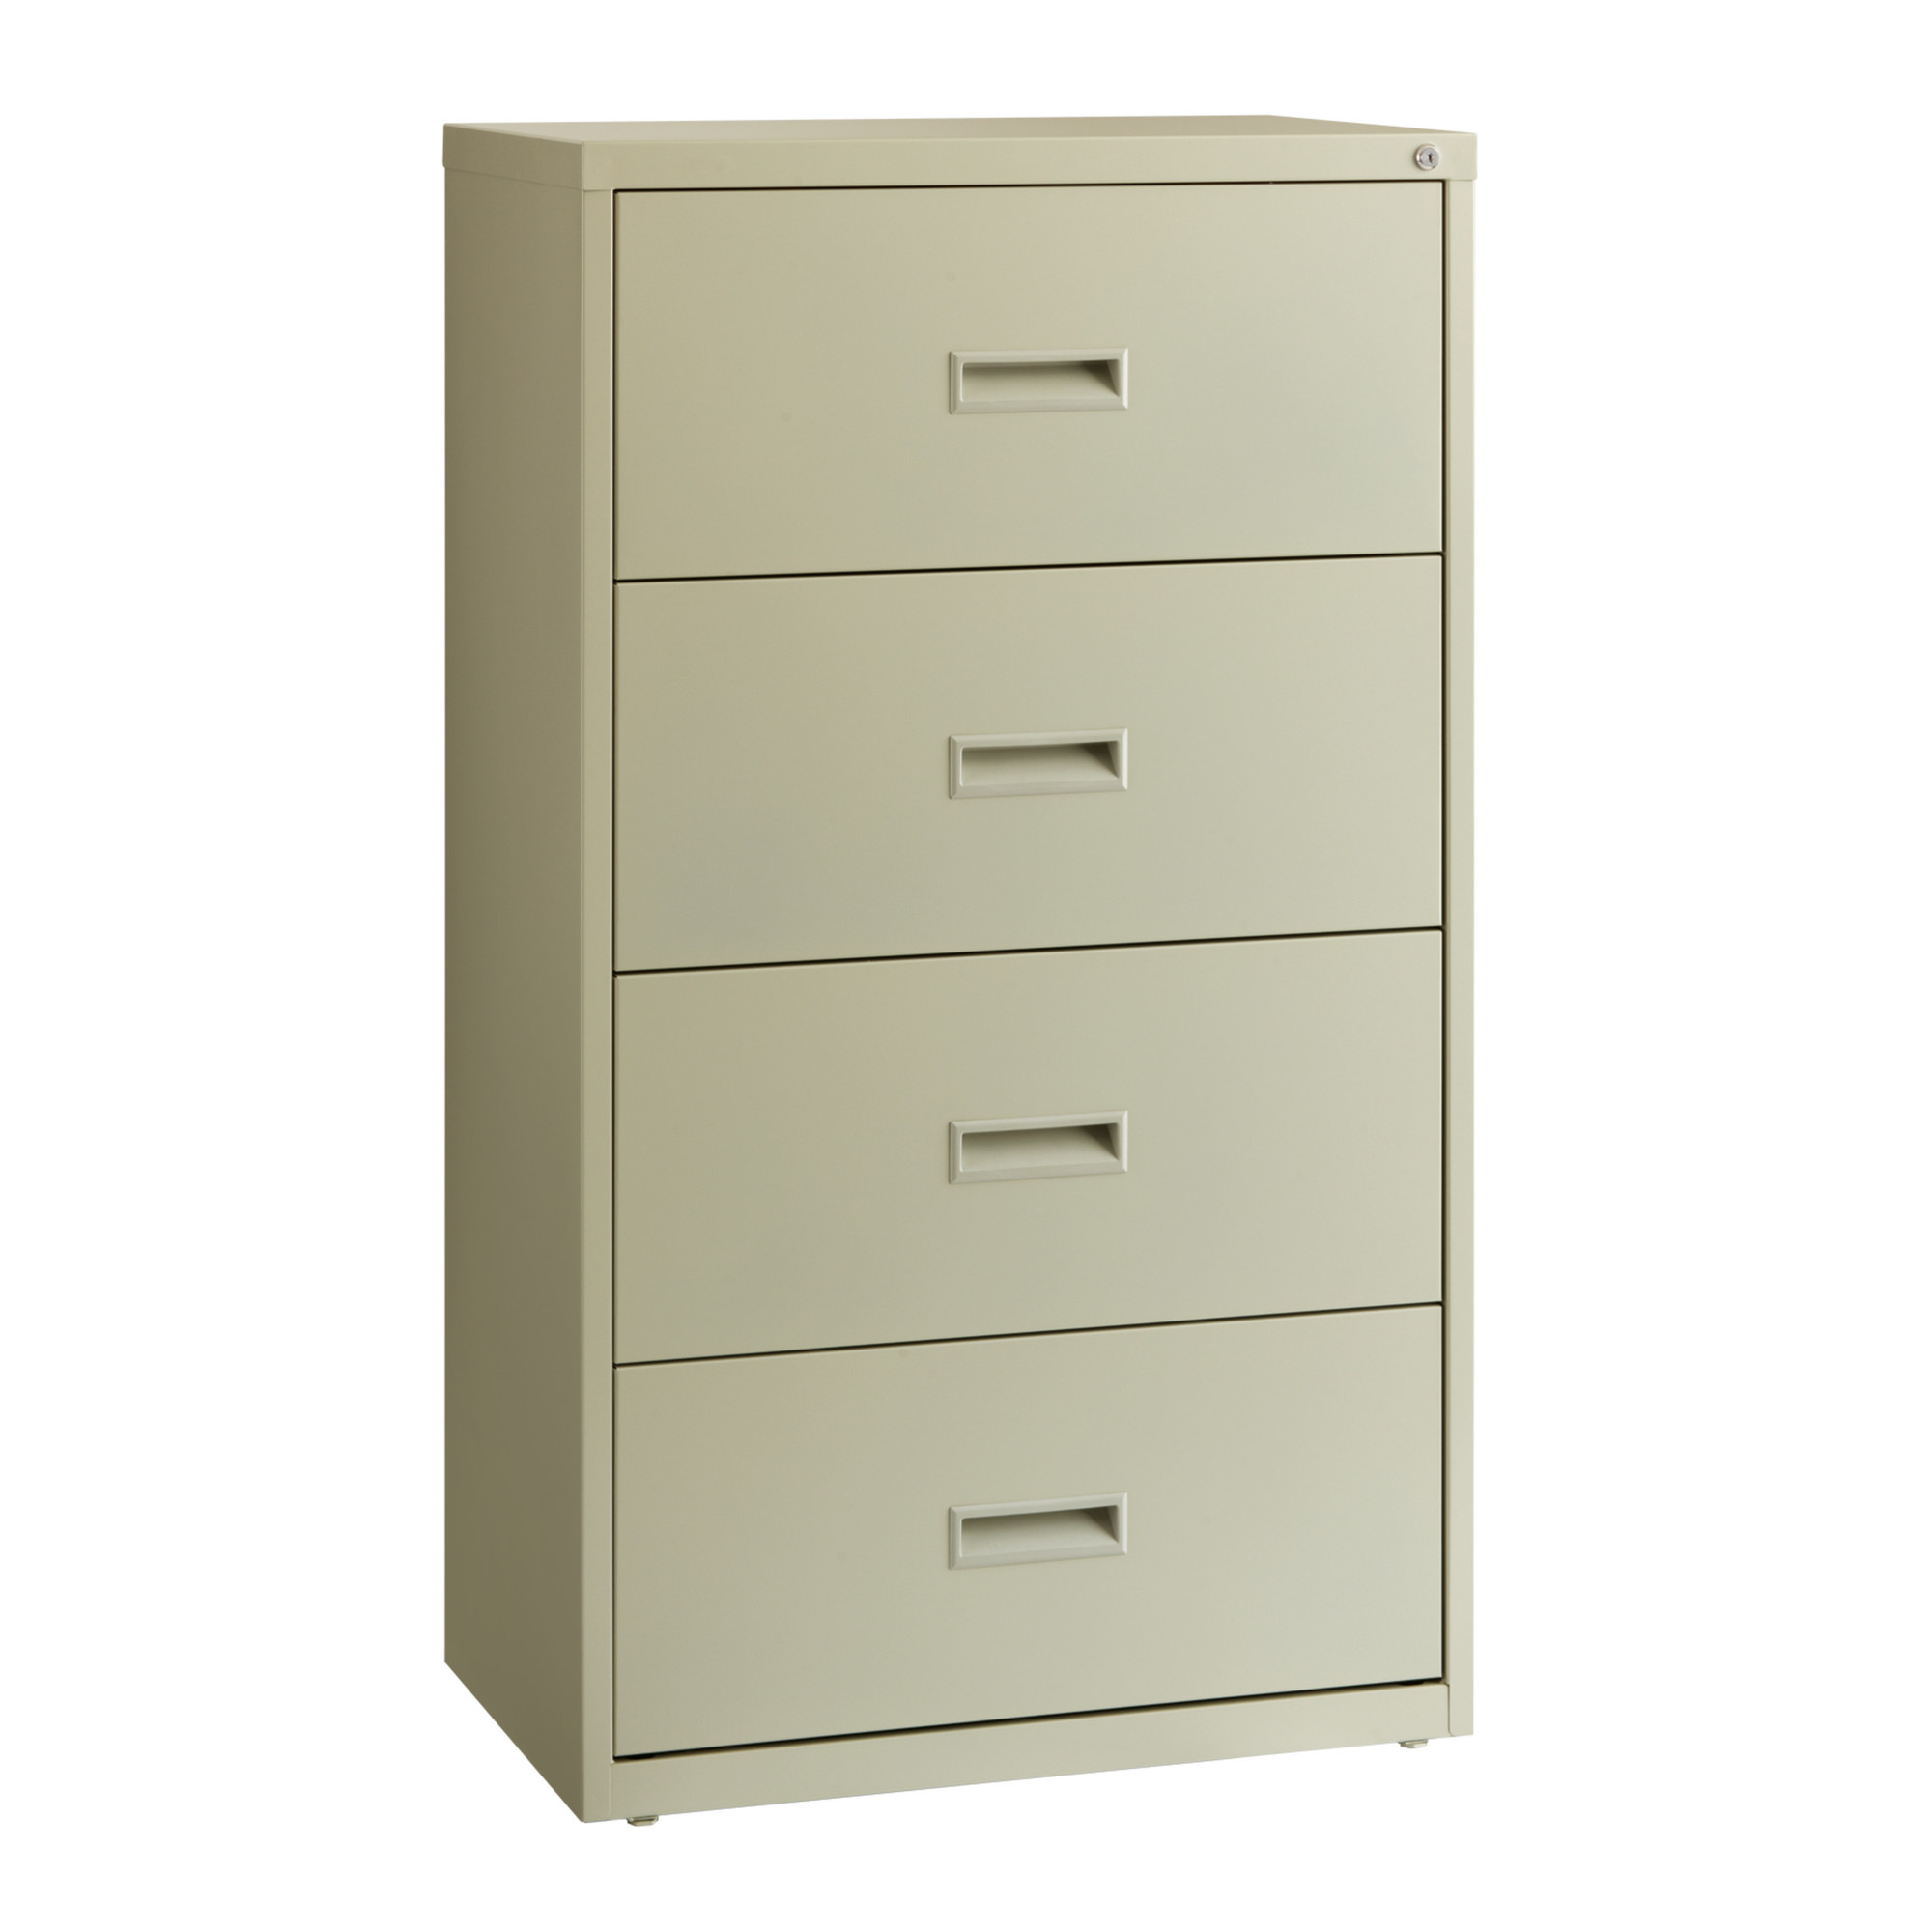 Hirsh Industries, 4 Drawer Lateral File Cabinet, Width 30 in, Depth 18.625 in, Height 52.5 in, Model 14956